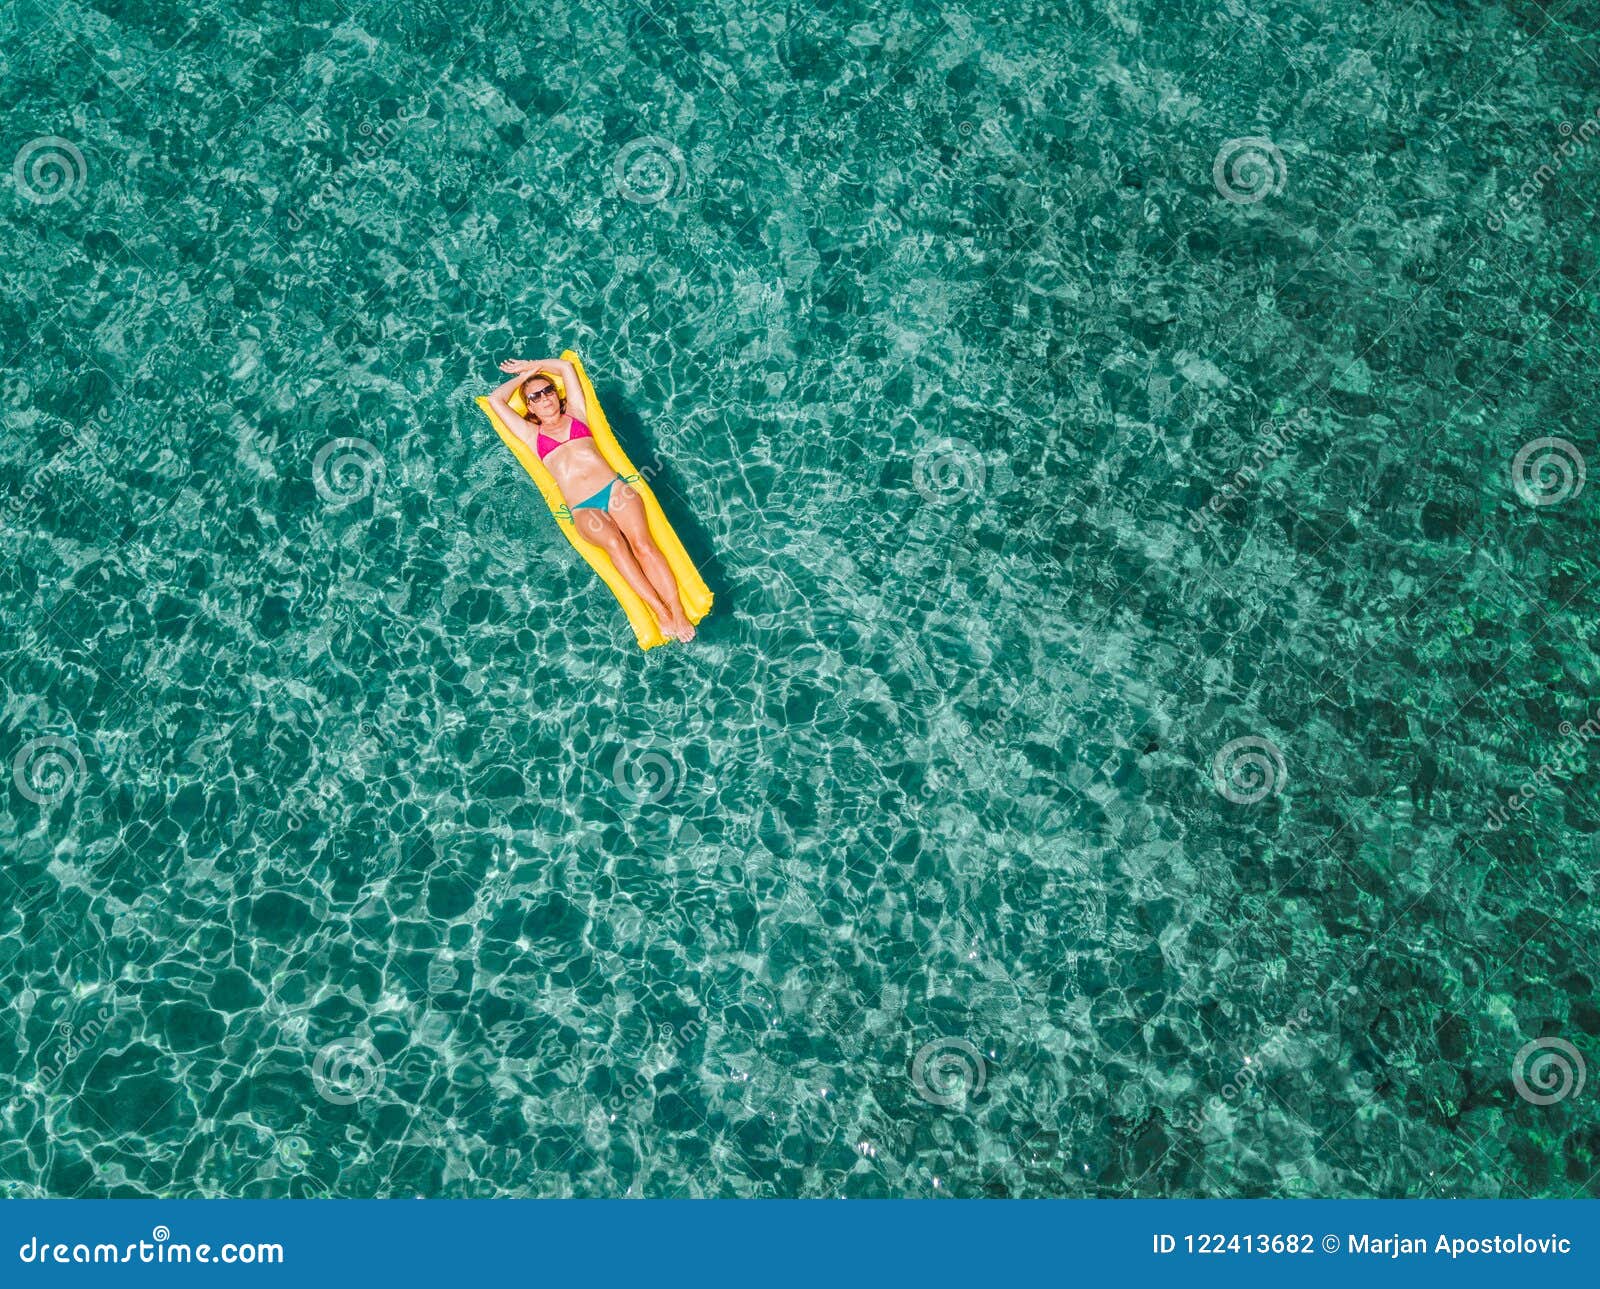 Aerial View of Woman Floating on the Water Mattress in the Sea Stock ...